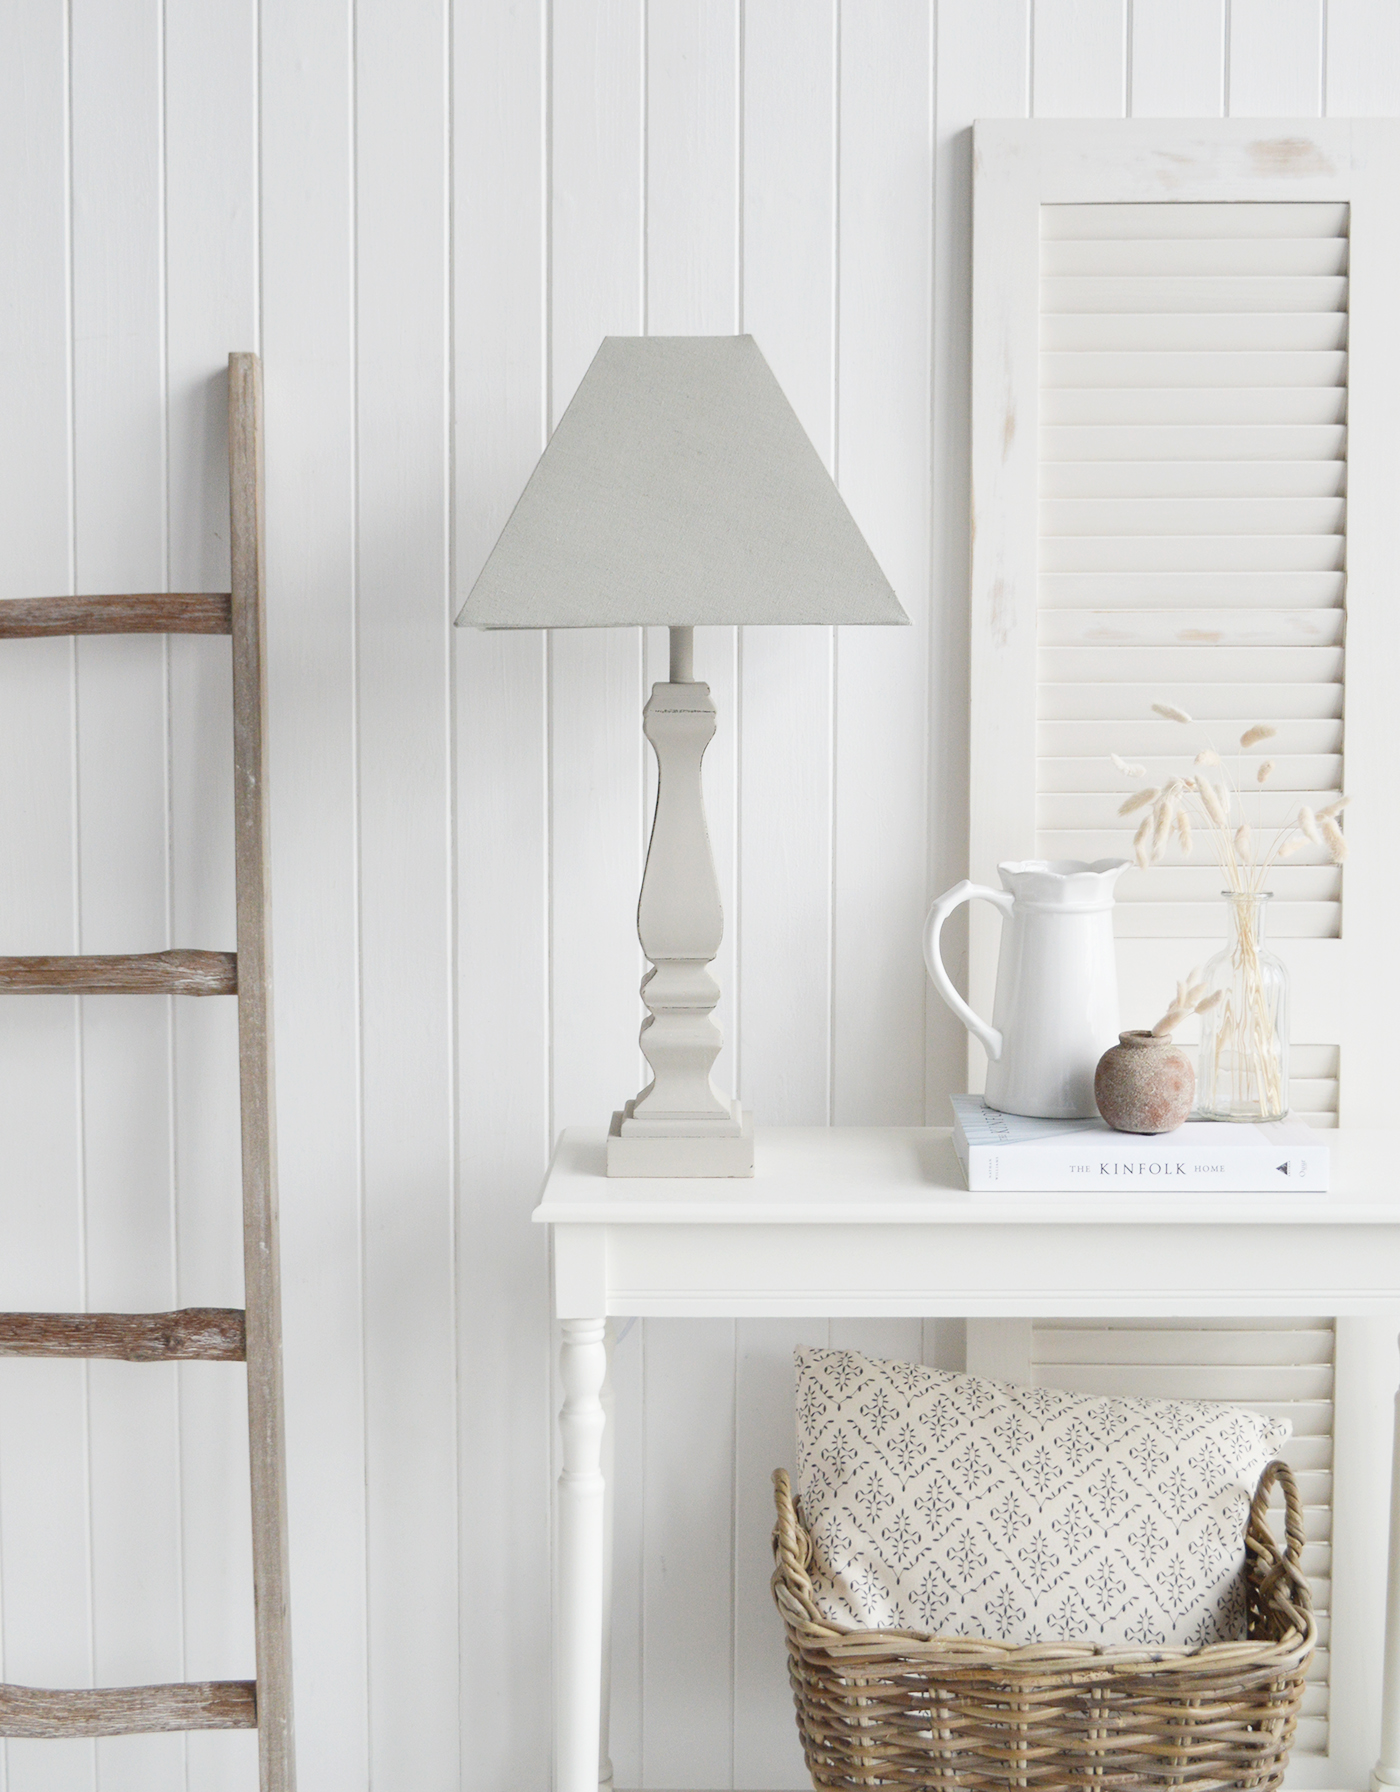 Hamptons Tall Soft Grey Table Lamp - New England Style Lamps from The White Lighthouse Furniture. Home Interiors and accessories for country, coastal, Modern Farmhouse and city New England Styled homes